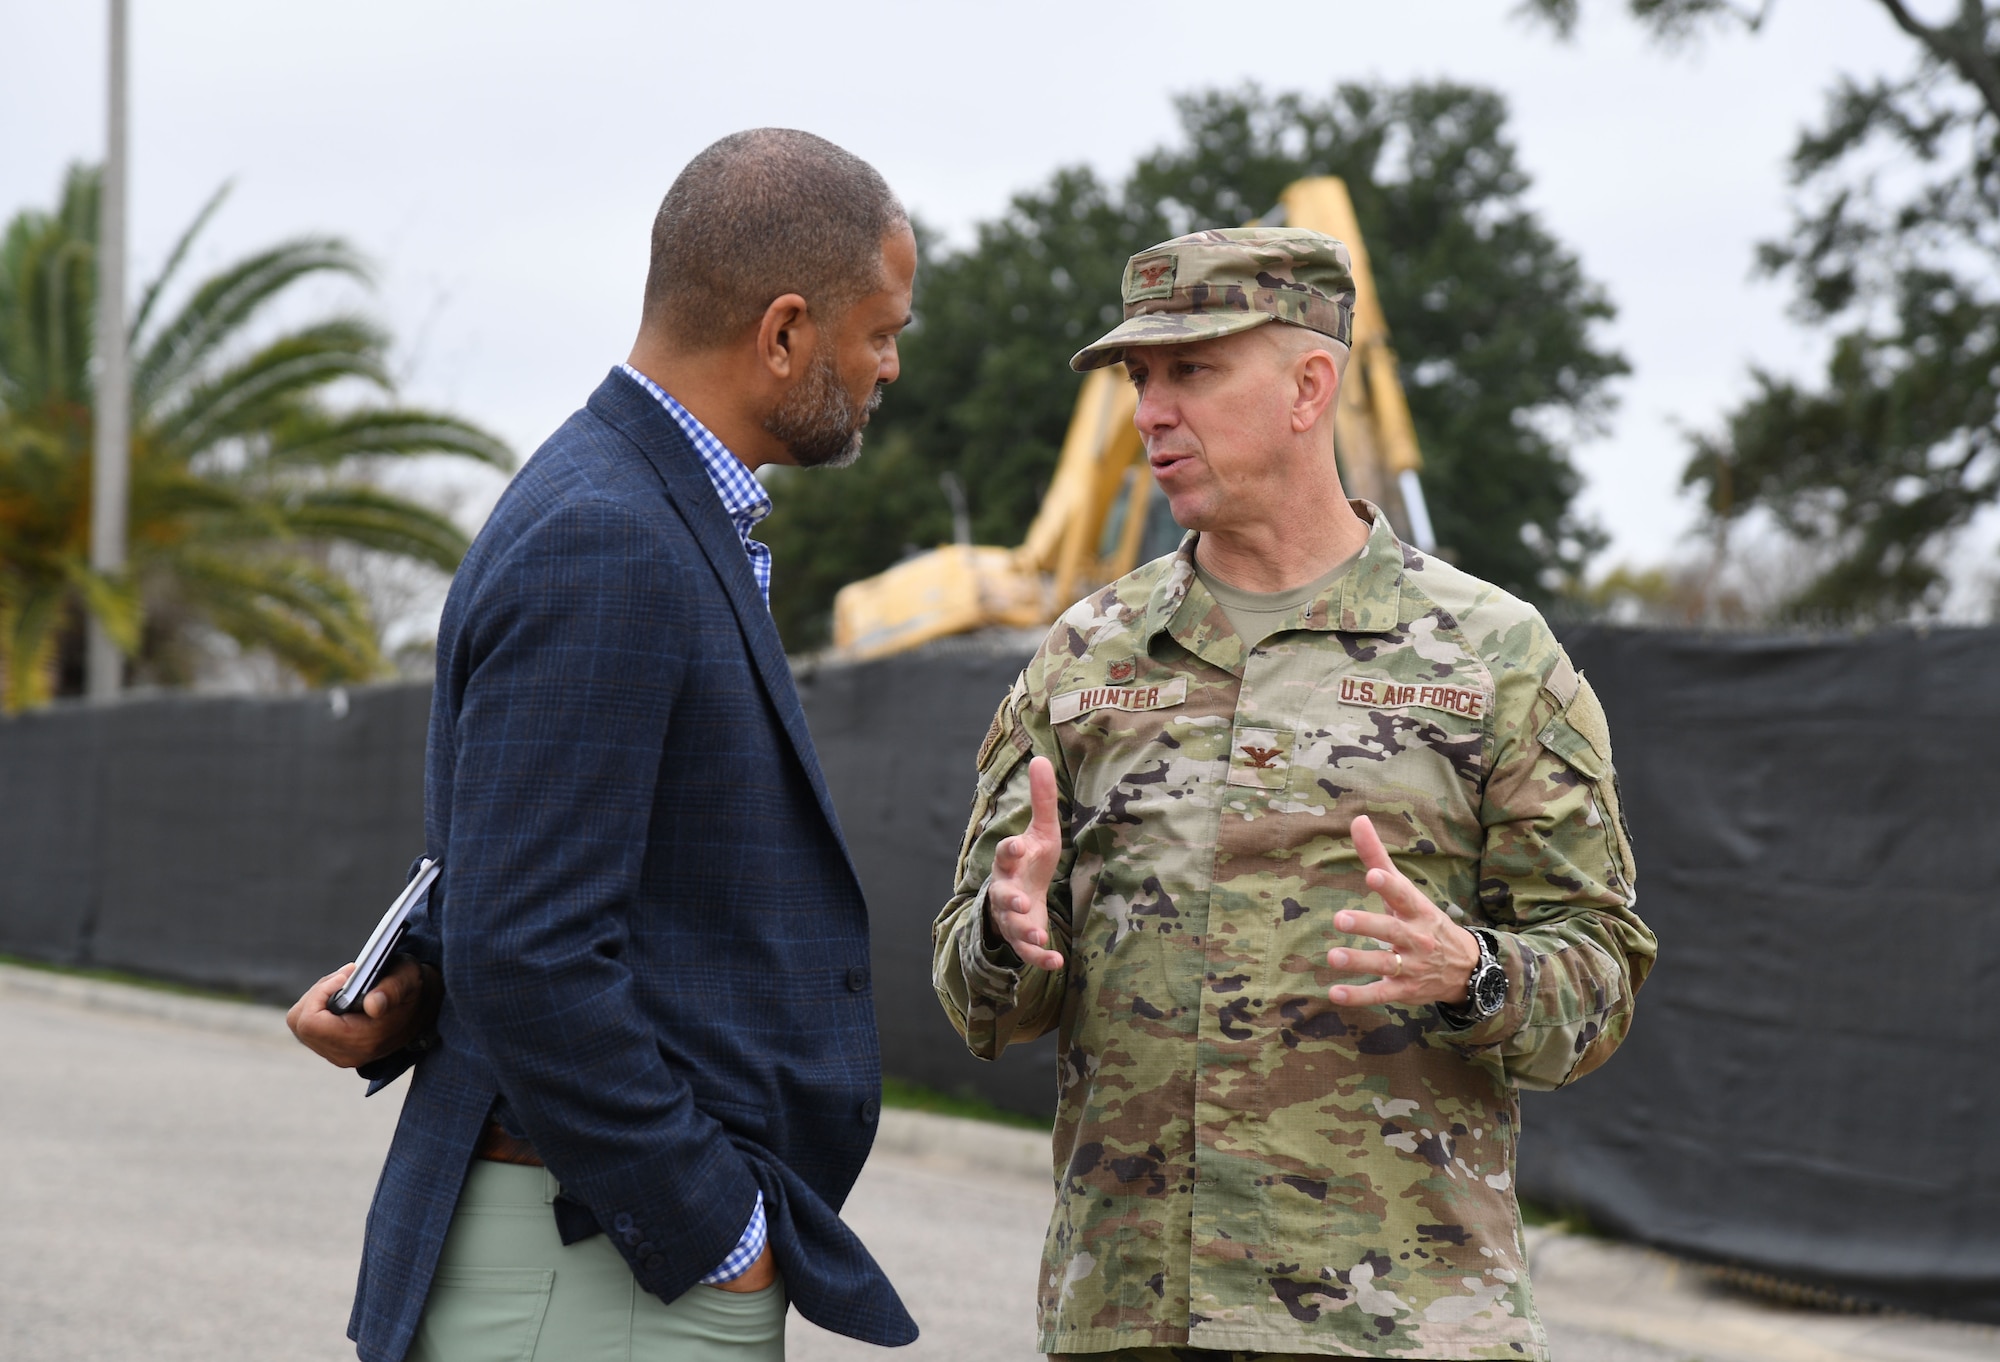 U.S. Air Force Col. William Hunter, 81st Training Wing commander, discusses the new Mississippi Cyber Center construction project with Jonathan Fleming, S2 Global president, during A Day At Keesler at Keesler Air Force Base, Mississippi, Dec. 9, 2022.